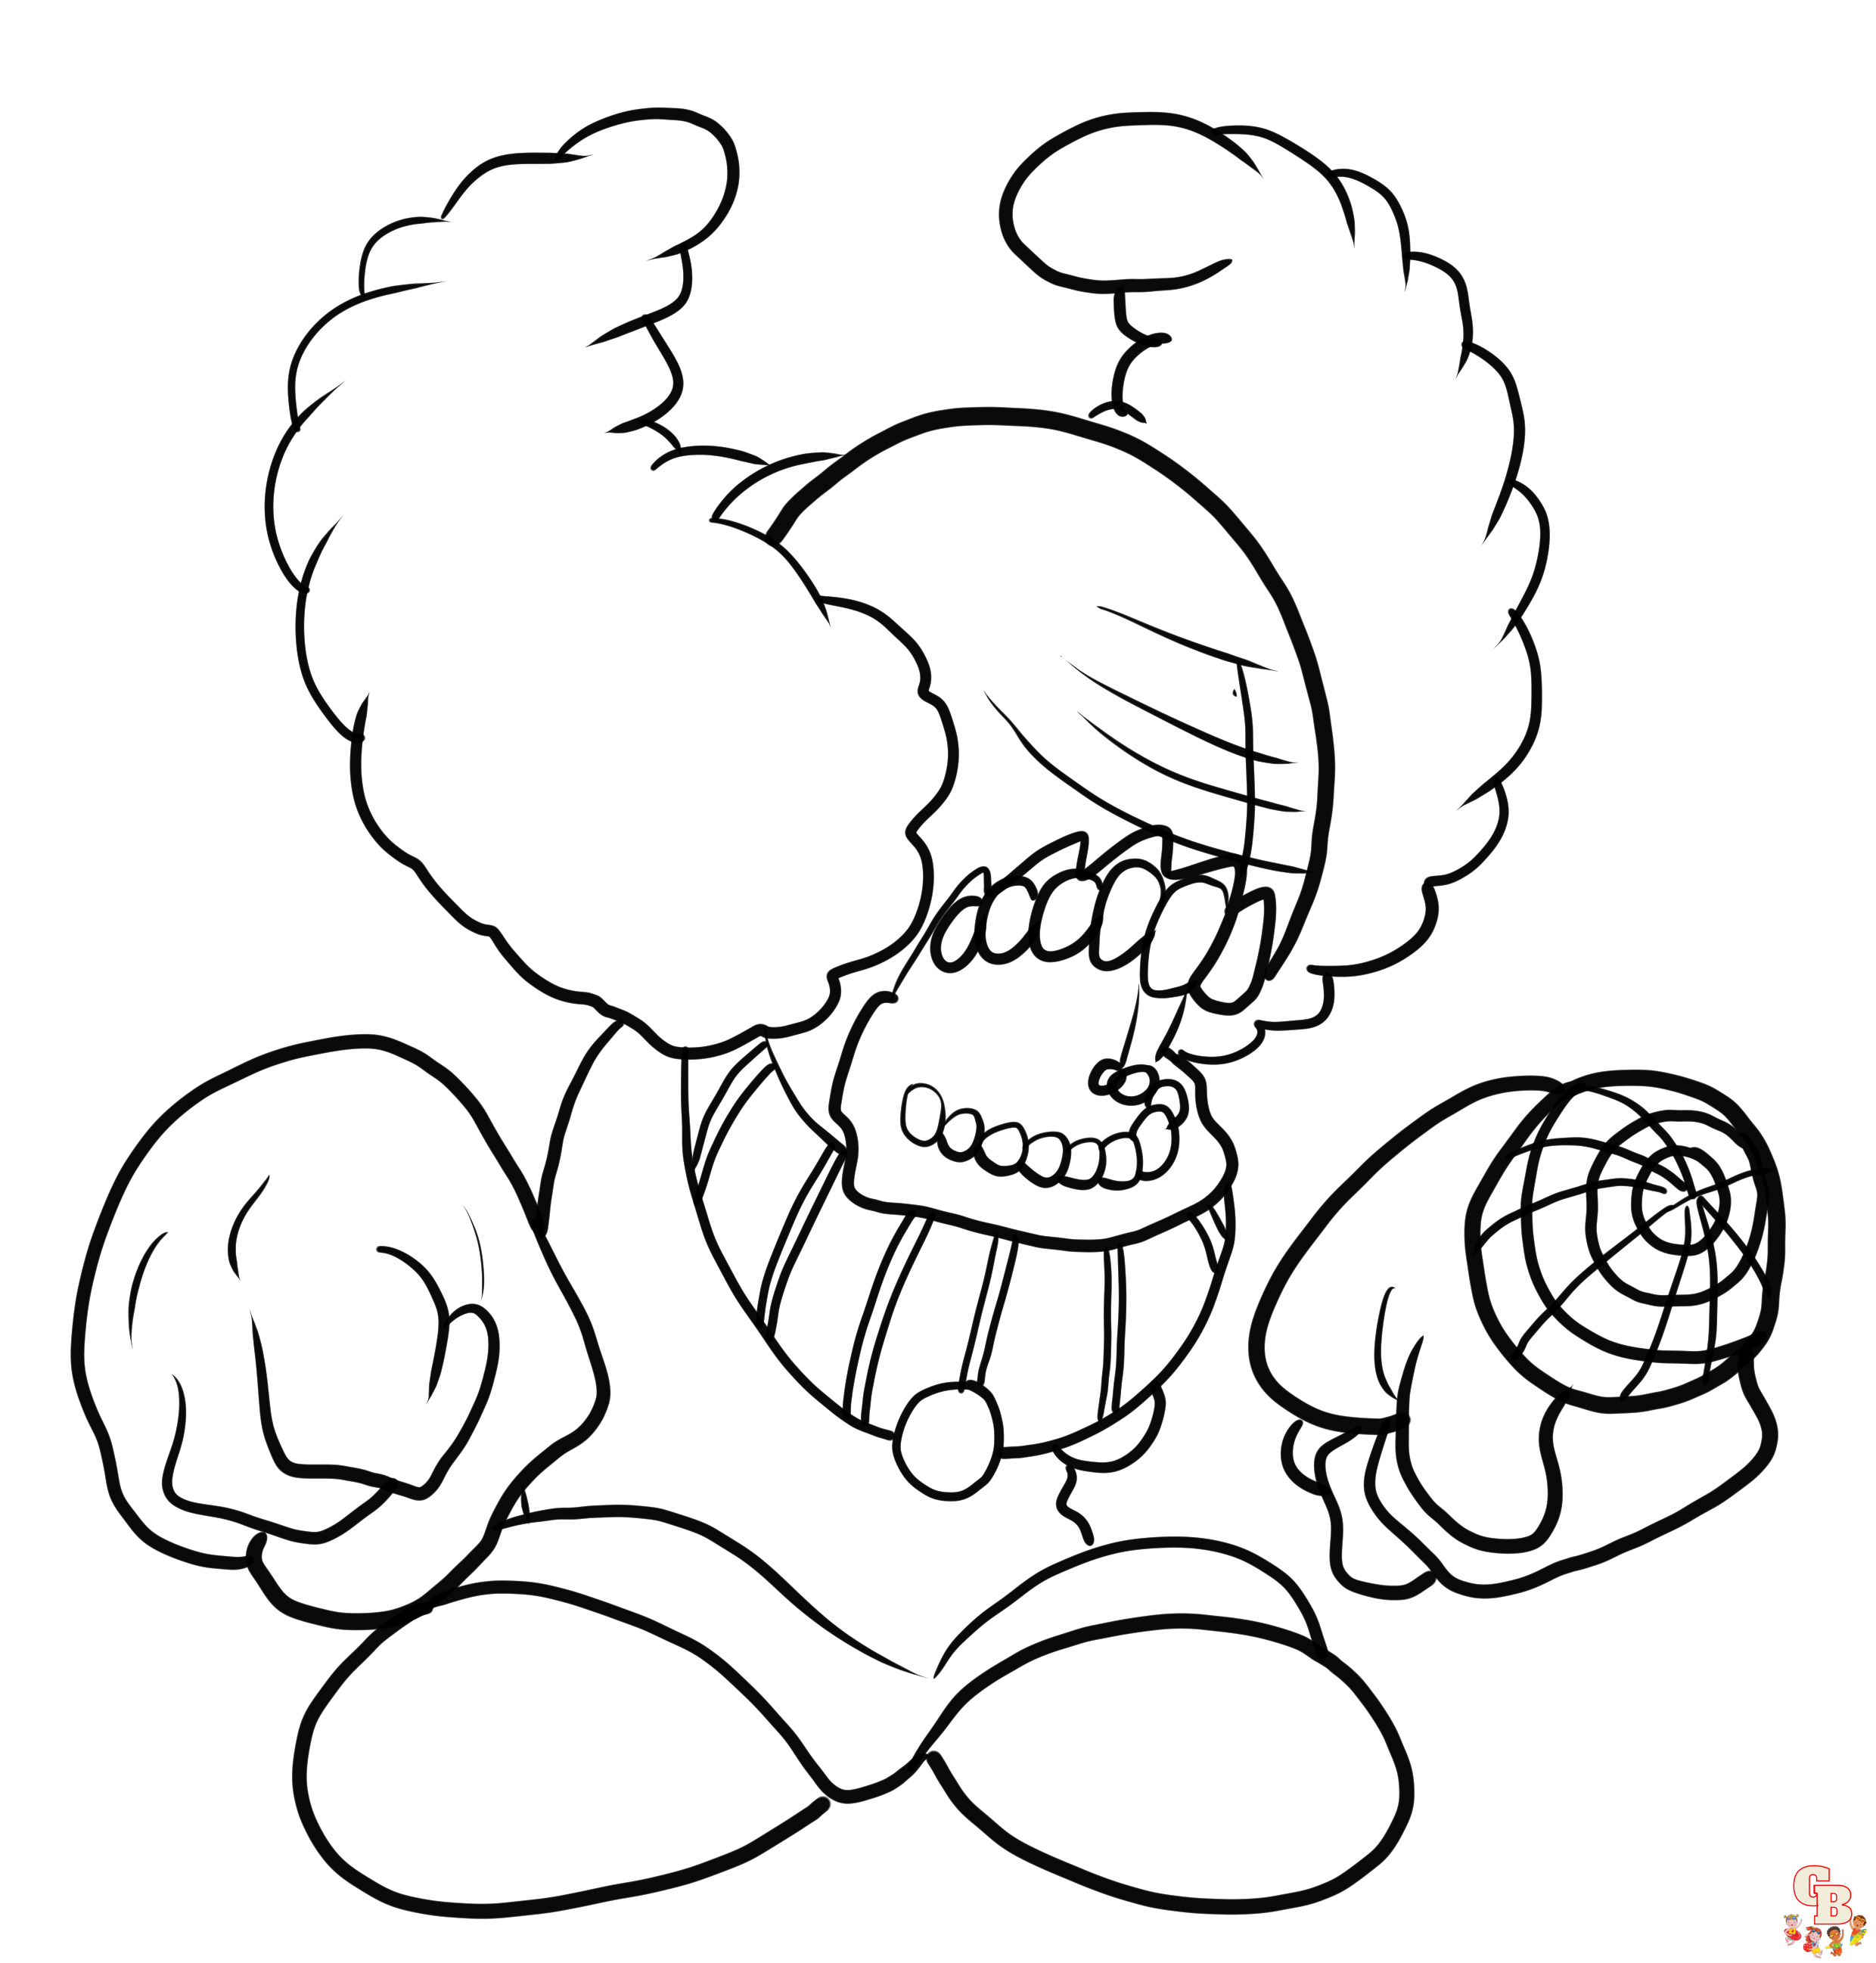 Fnf coloring pages 1